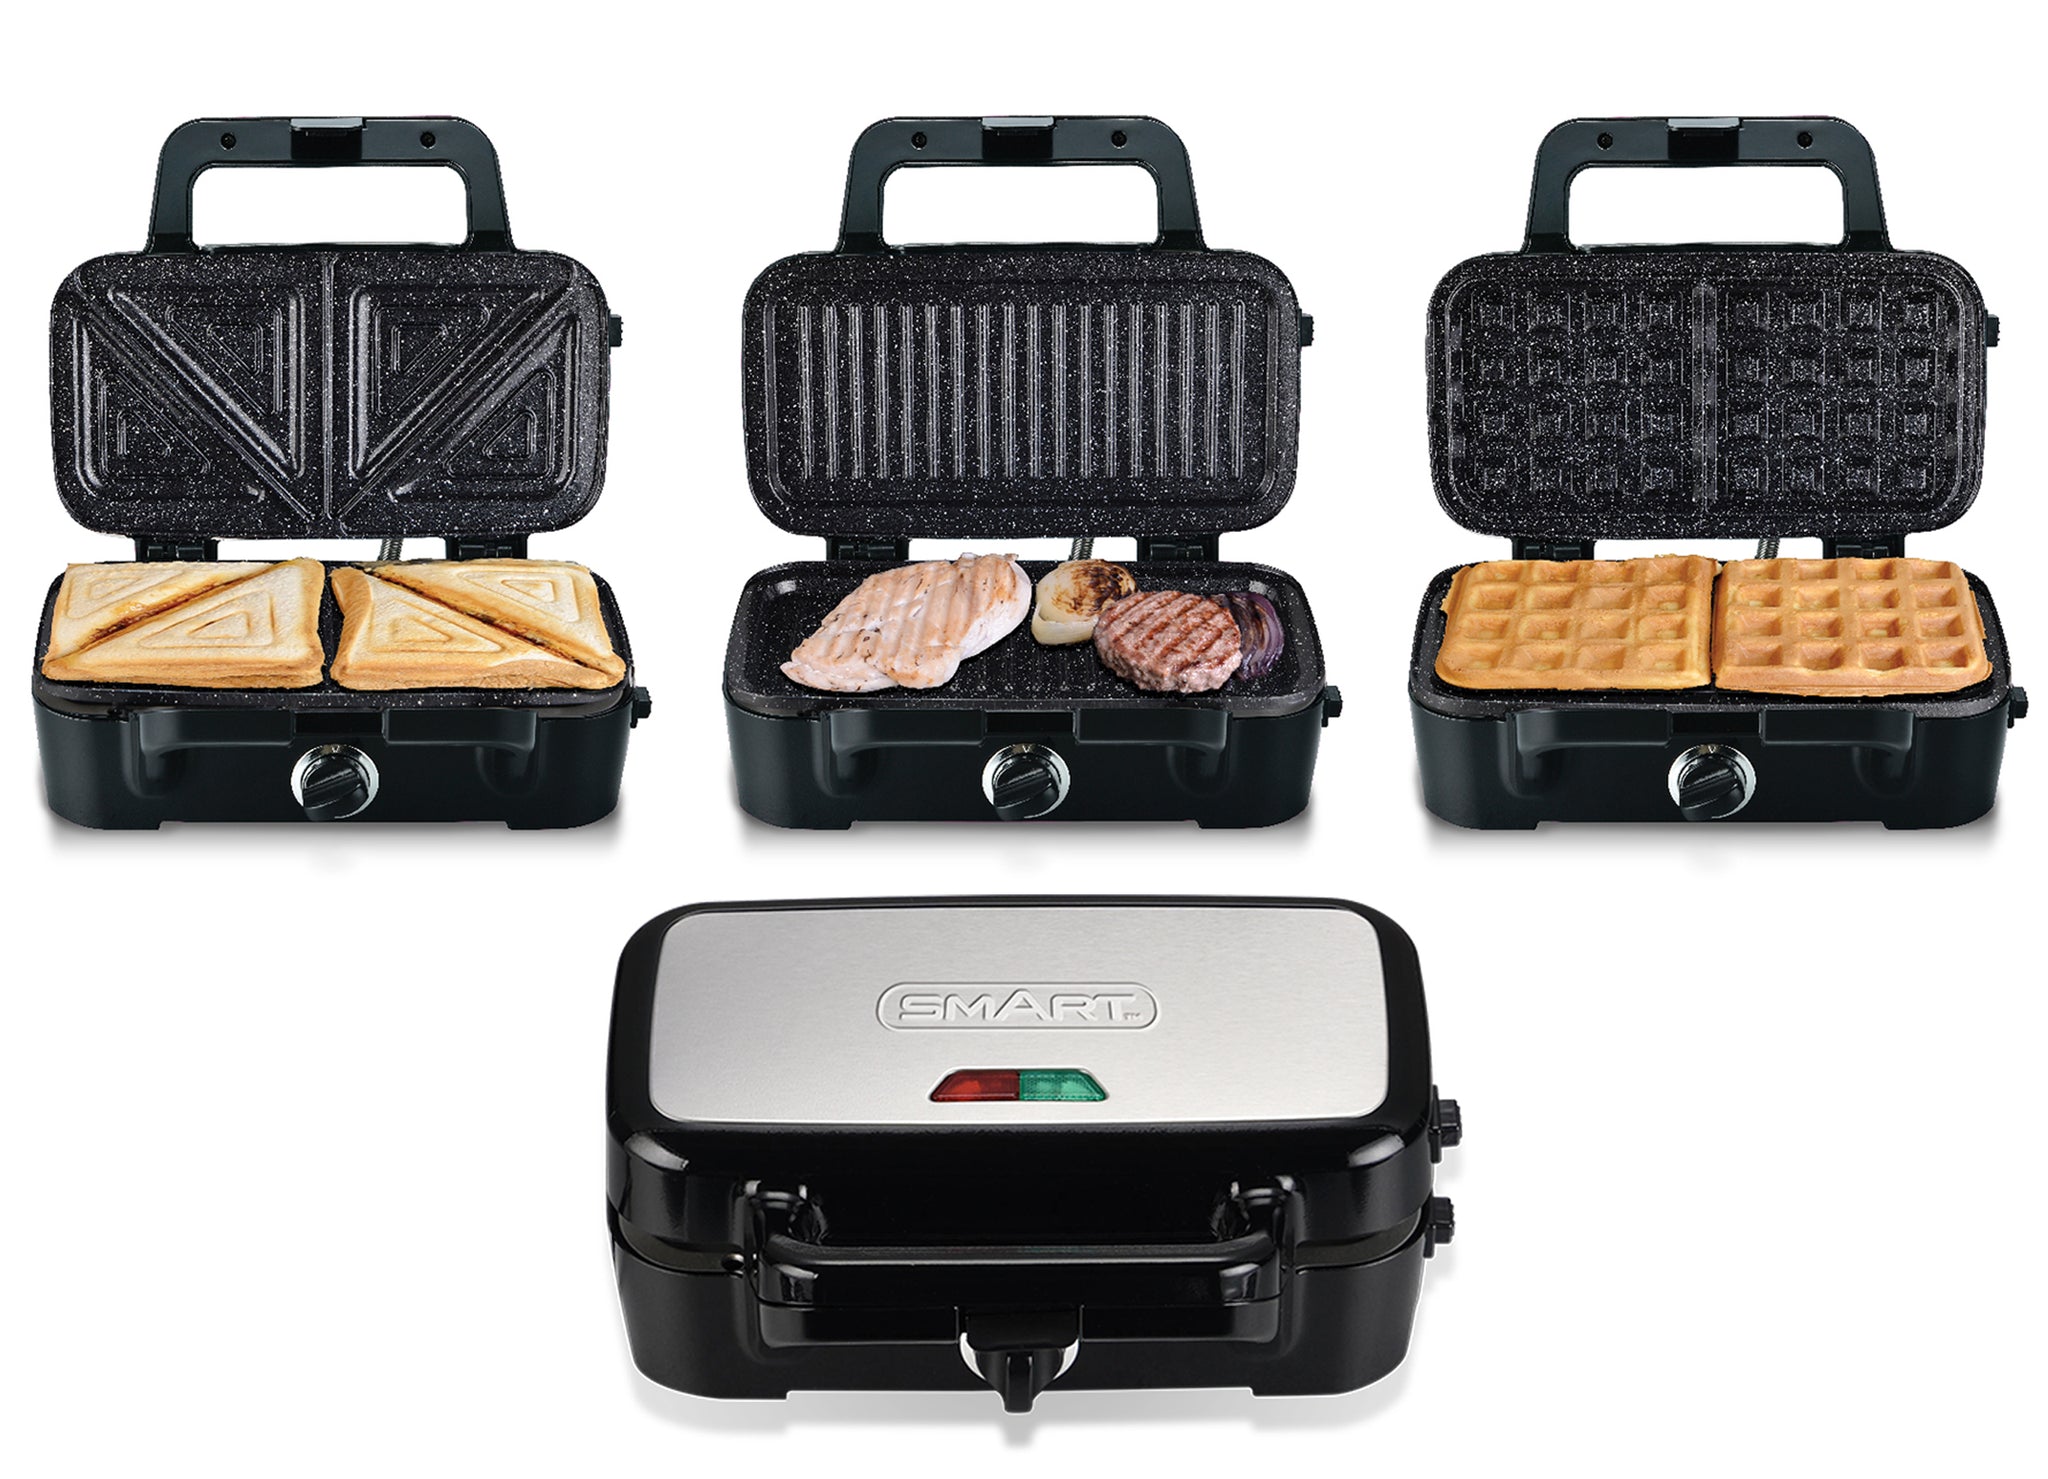 3 in 1 Electric Sandwich Maker, Panini Press Grill and Waffle Iron Set with  Removable Non-Stick Plates, Perfect for Cooking Grilled Cheese, Tuna Melts,  Burgers, Steaks and Snacks, Black 